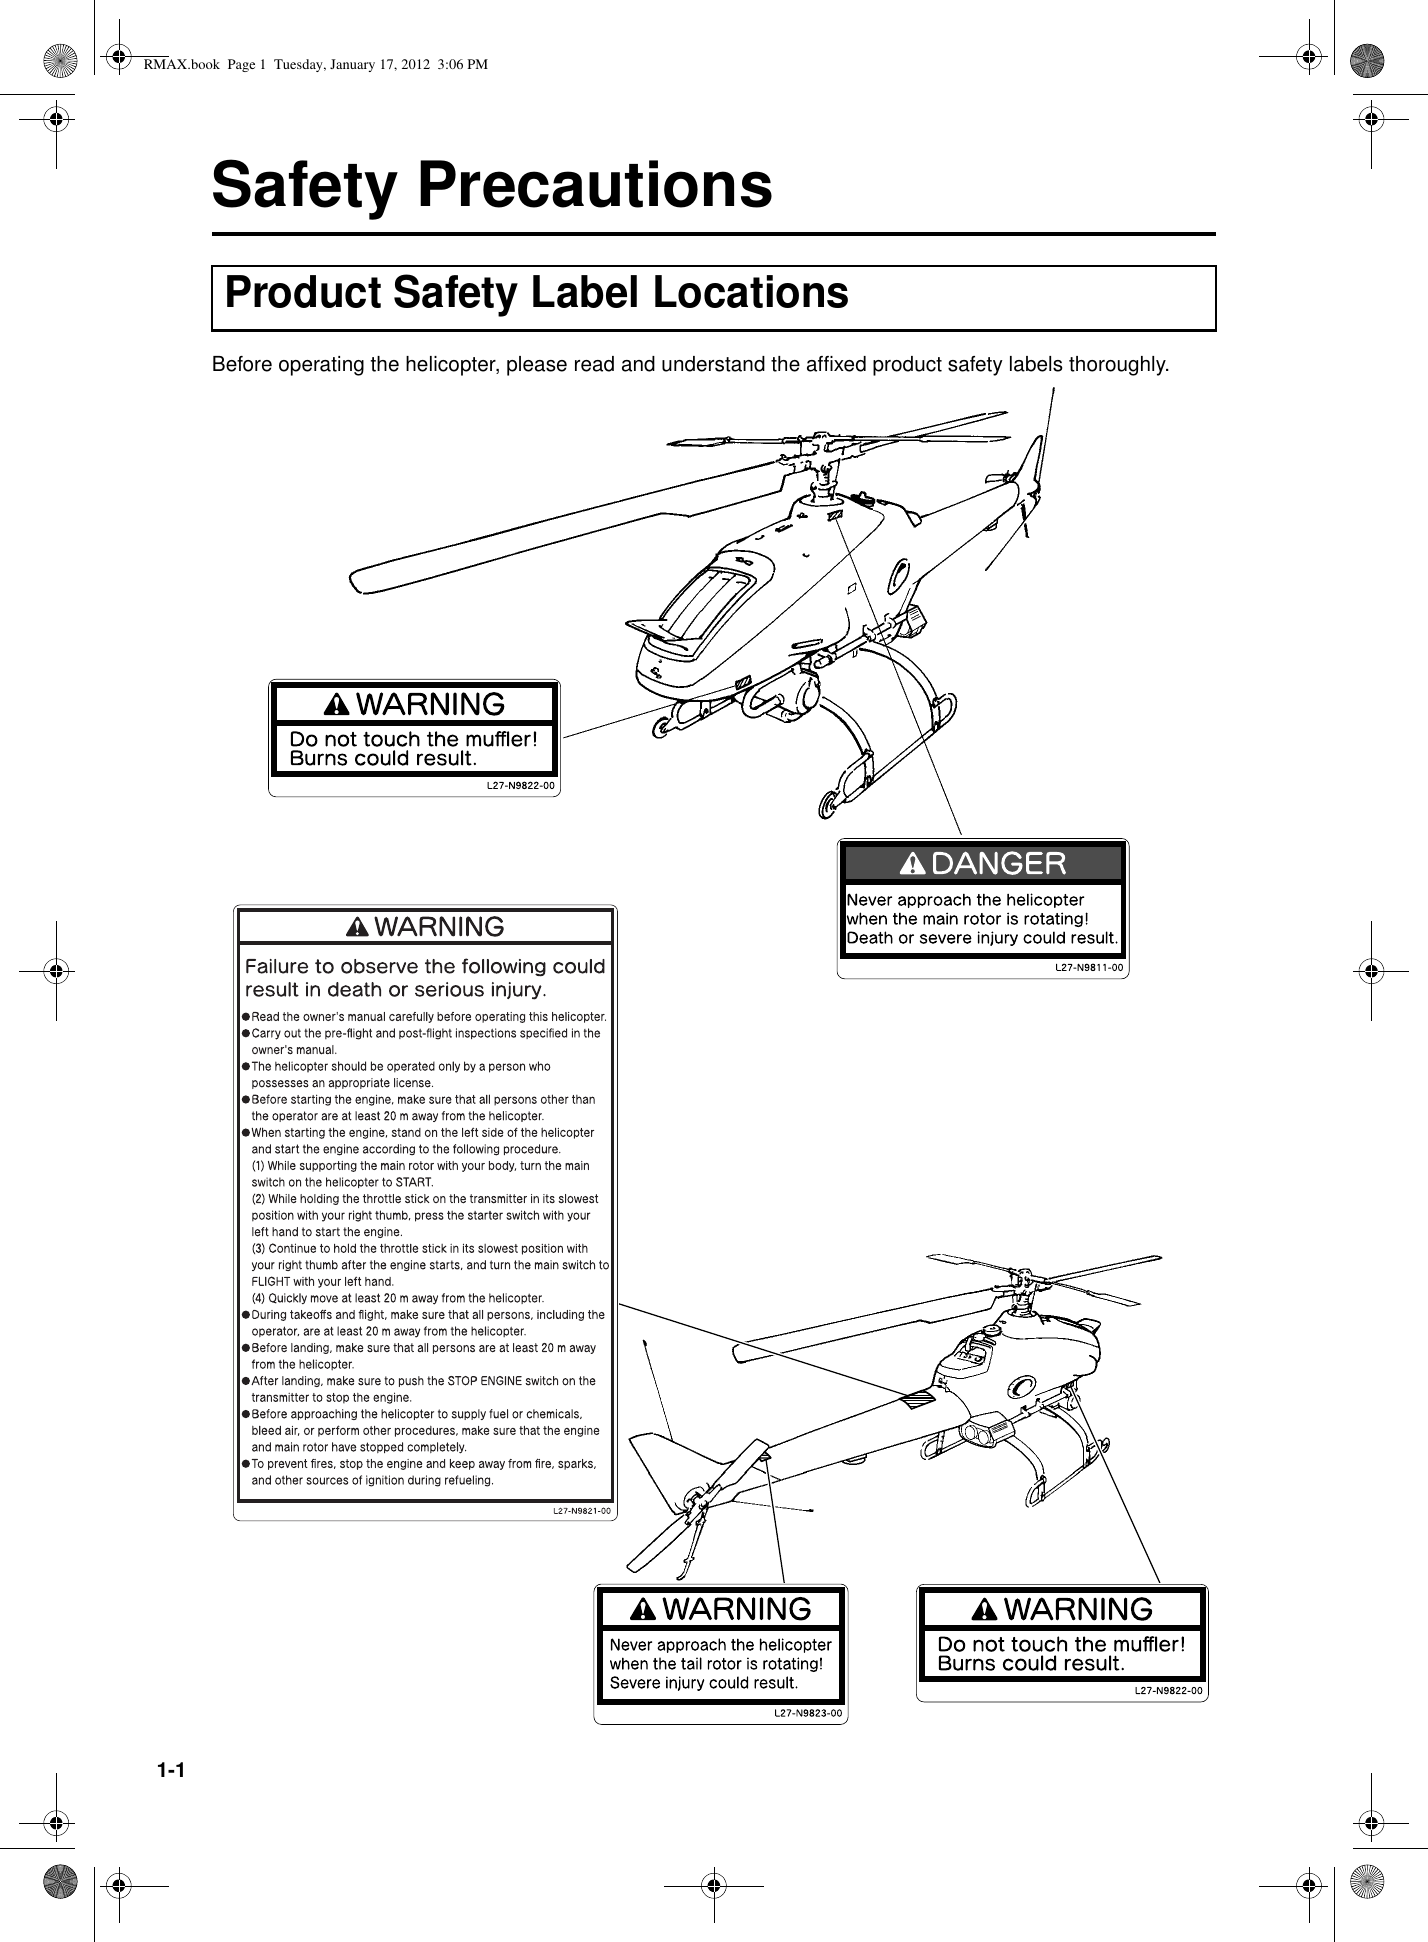 1-1Safety PrecautionsBefore operating the helicopter, please read and understand the affixed product safety labels thoroughly.Product Safety Label LocationsRMAX.book  Page 1  Tuesday, January 17, 2012  3:06 PM